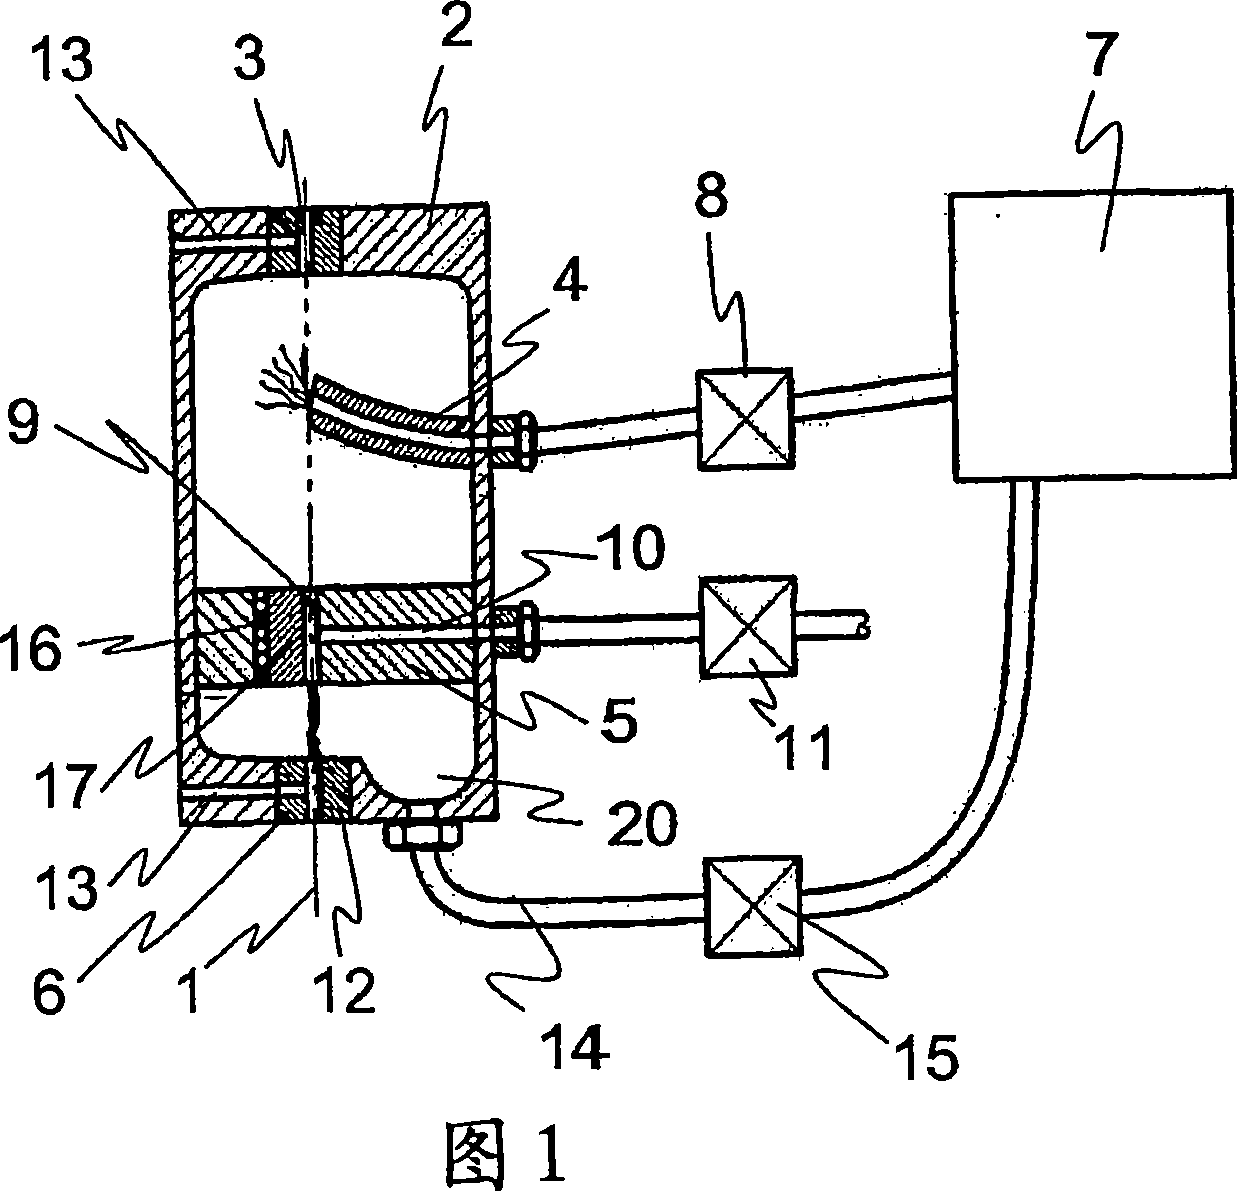 Device and method for applying a preparation to threads